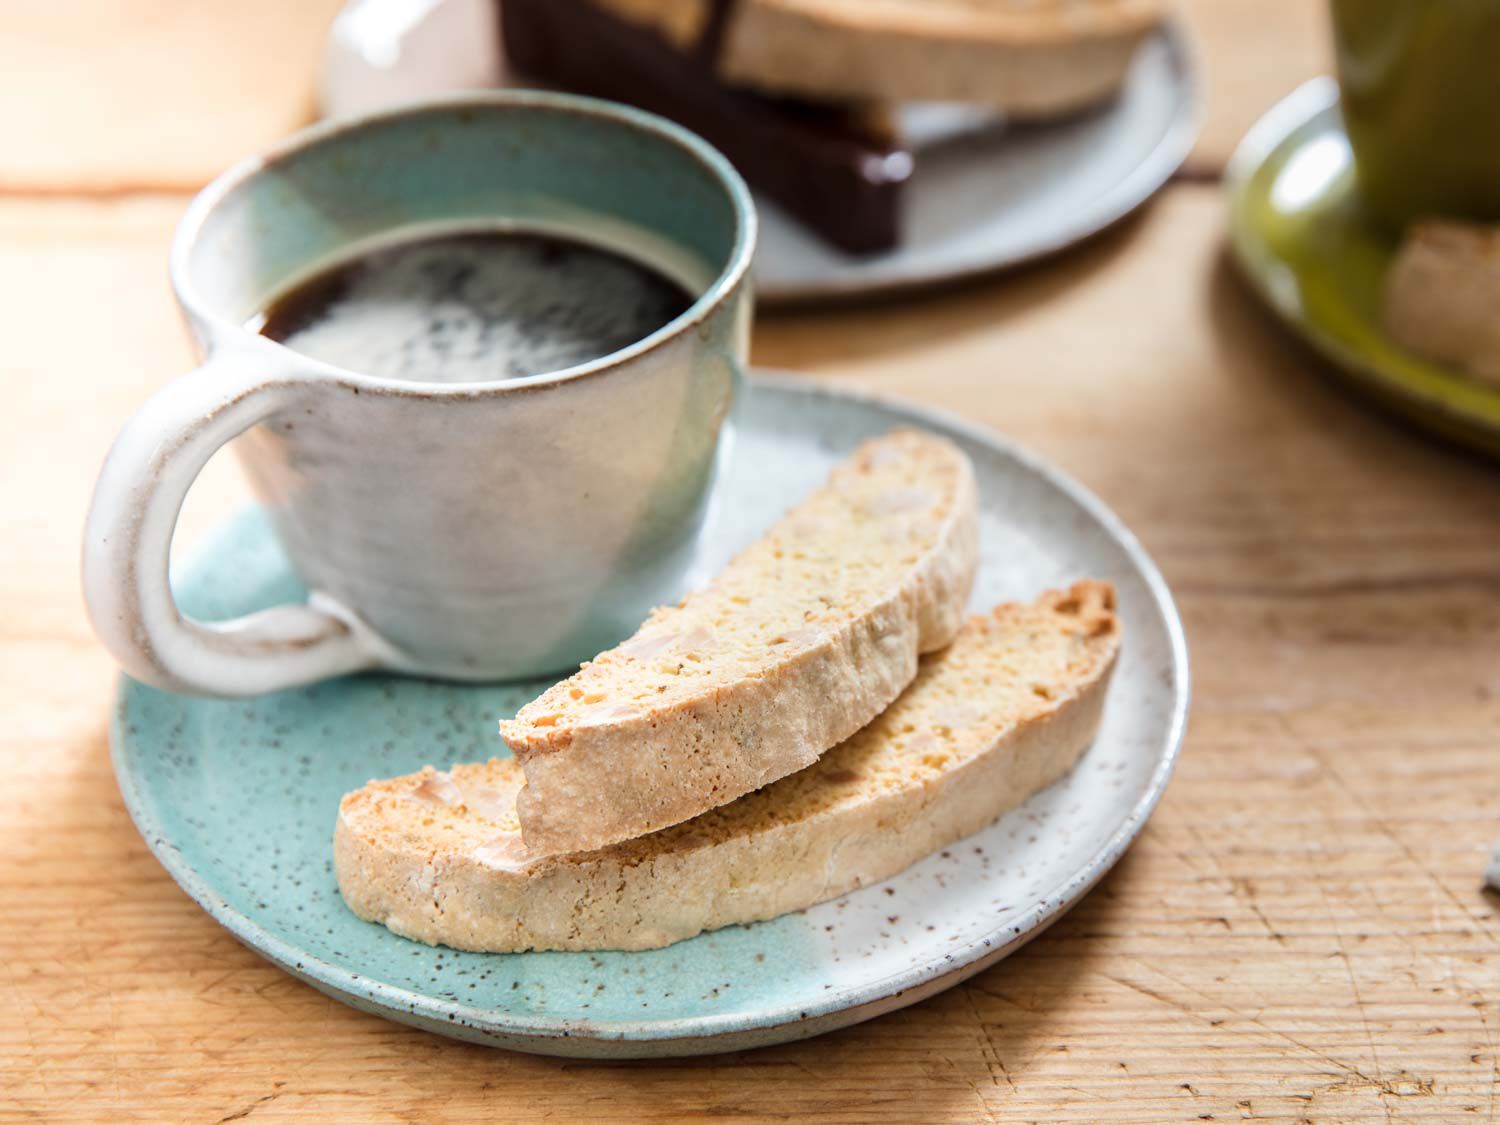 Two biscotti stacked next to a ceramic mug of steaming coffee.